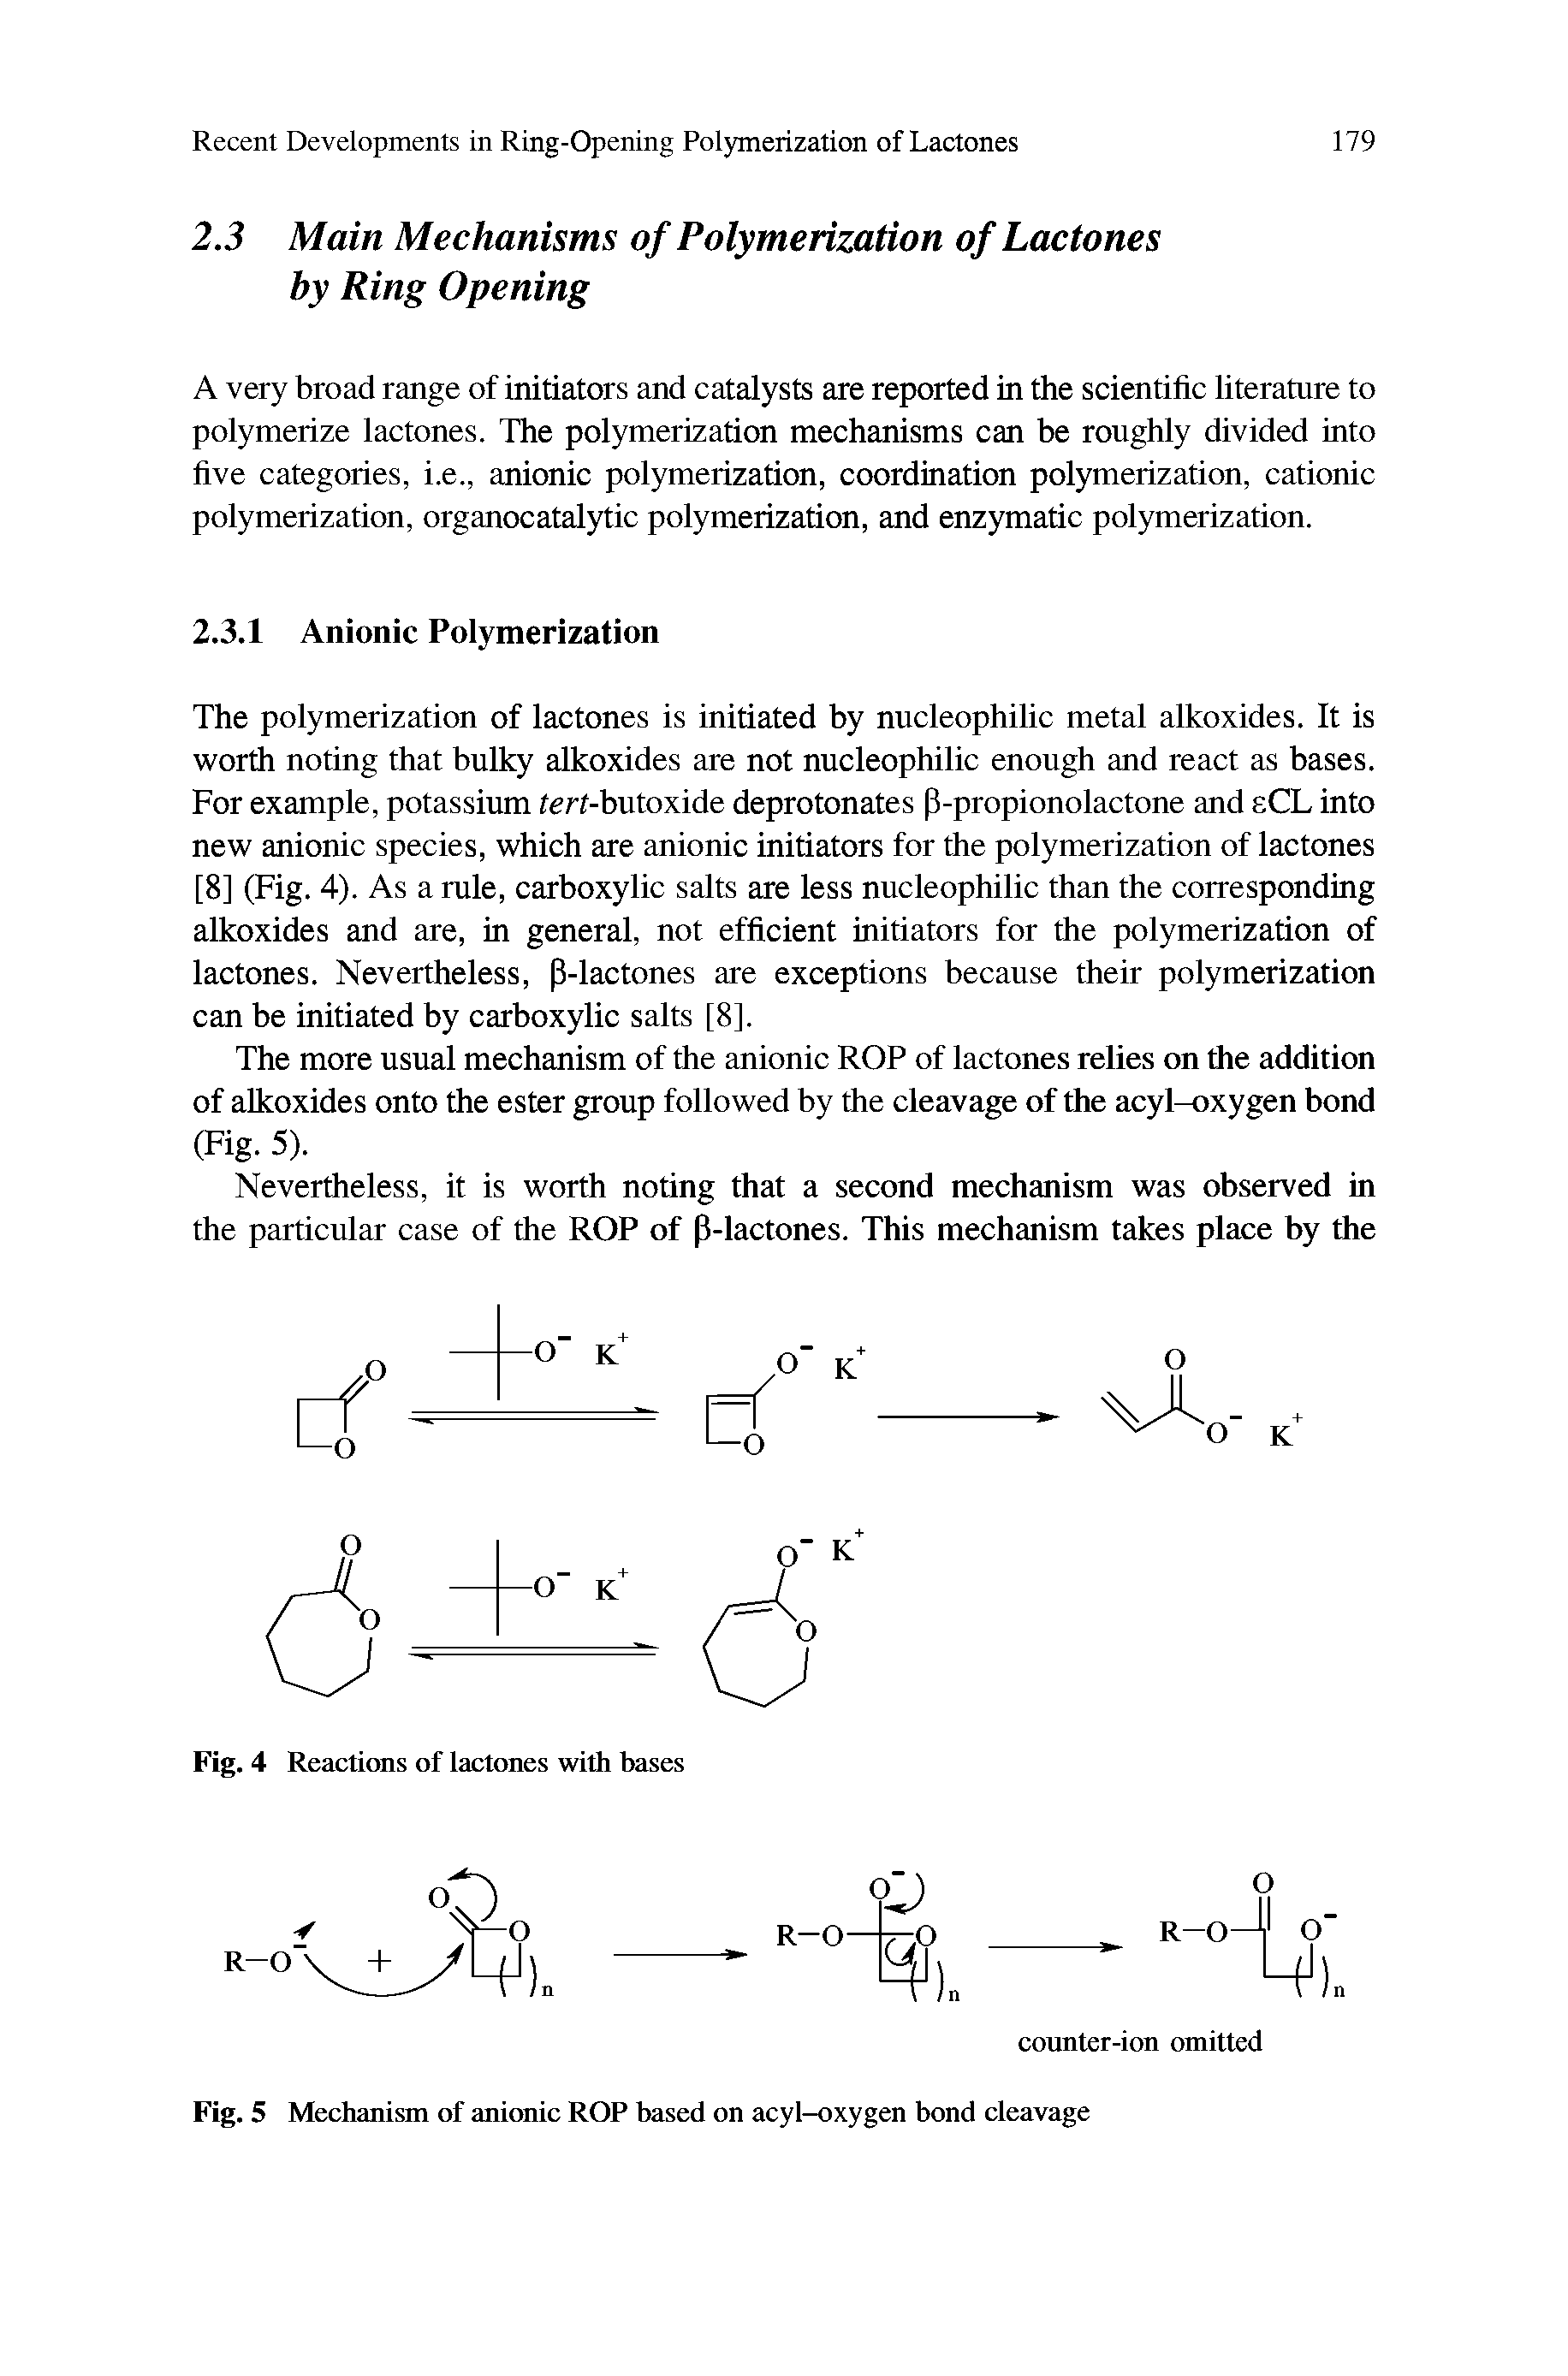 Fig. 5 Mechanism of anionic ROP based on acyl-oxygen bond cleavage...